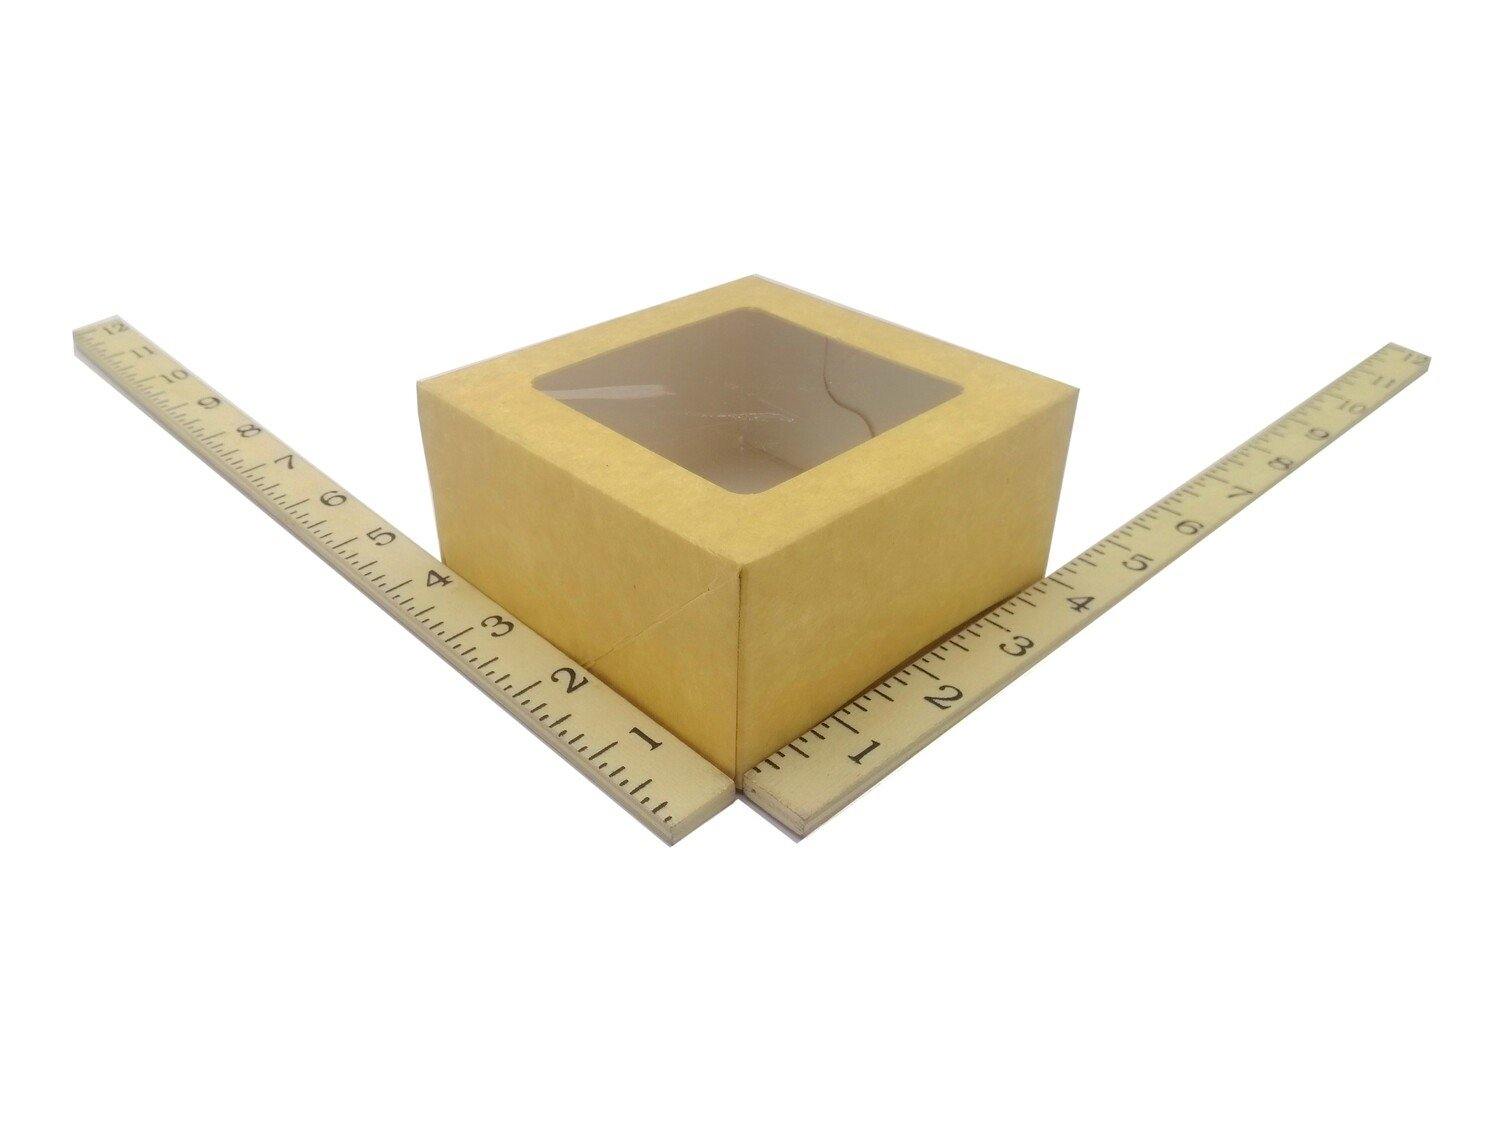 4 X 4 X 2 NATURAL BOX 20'S - Kitchen Convenience: Ingredients & Supplies Delivery